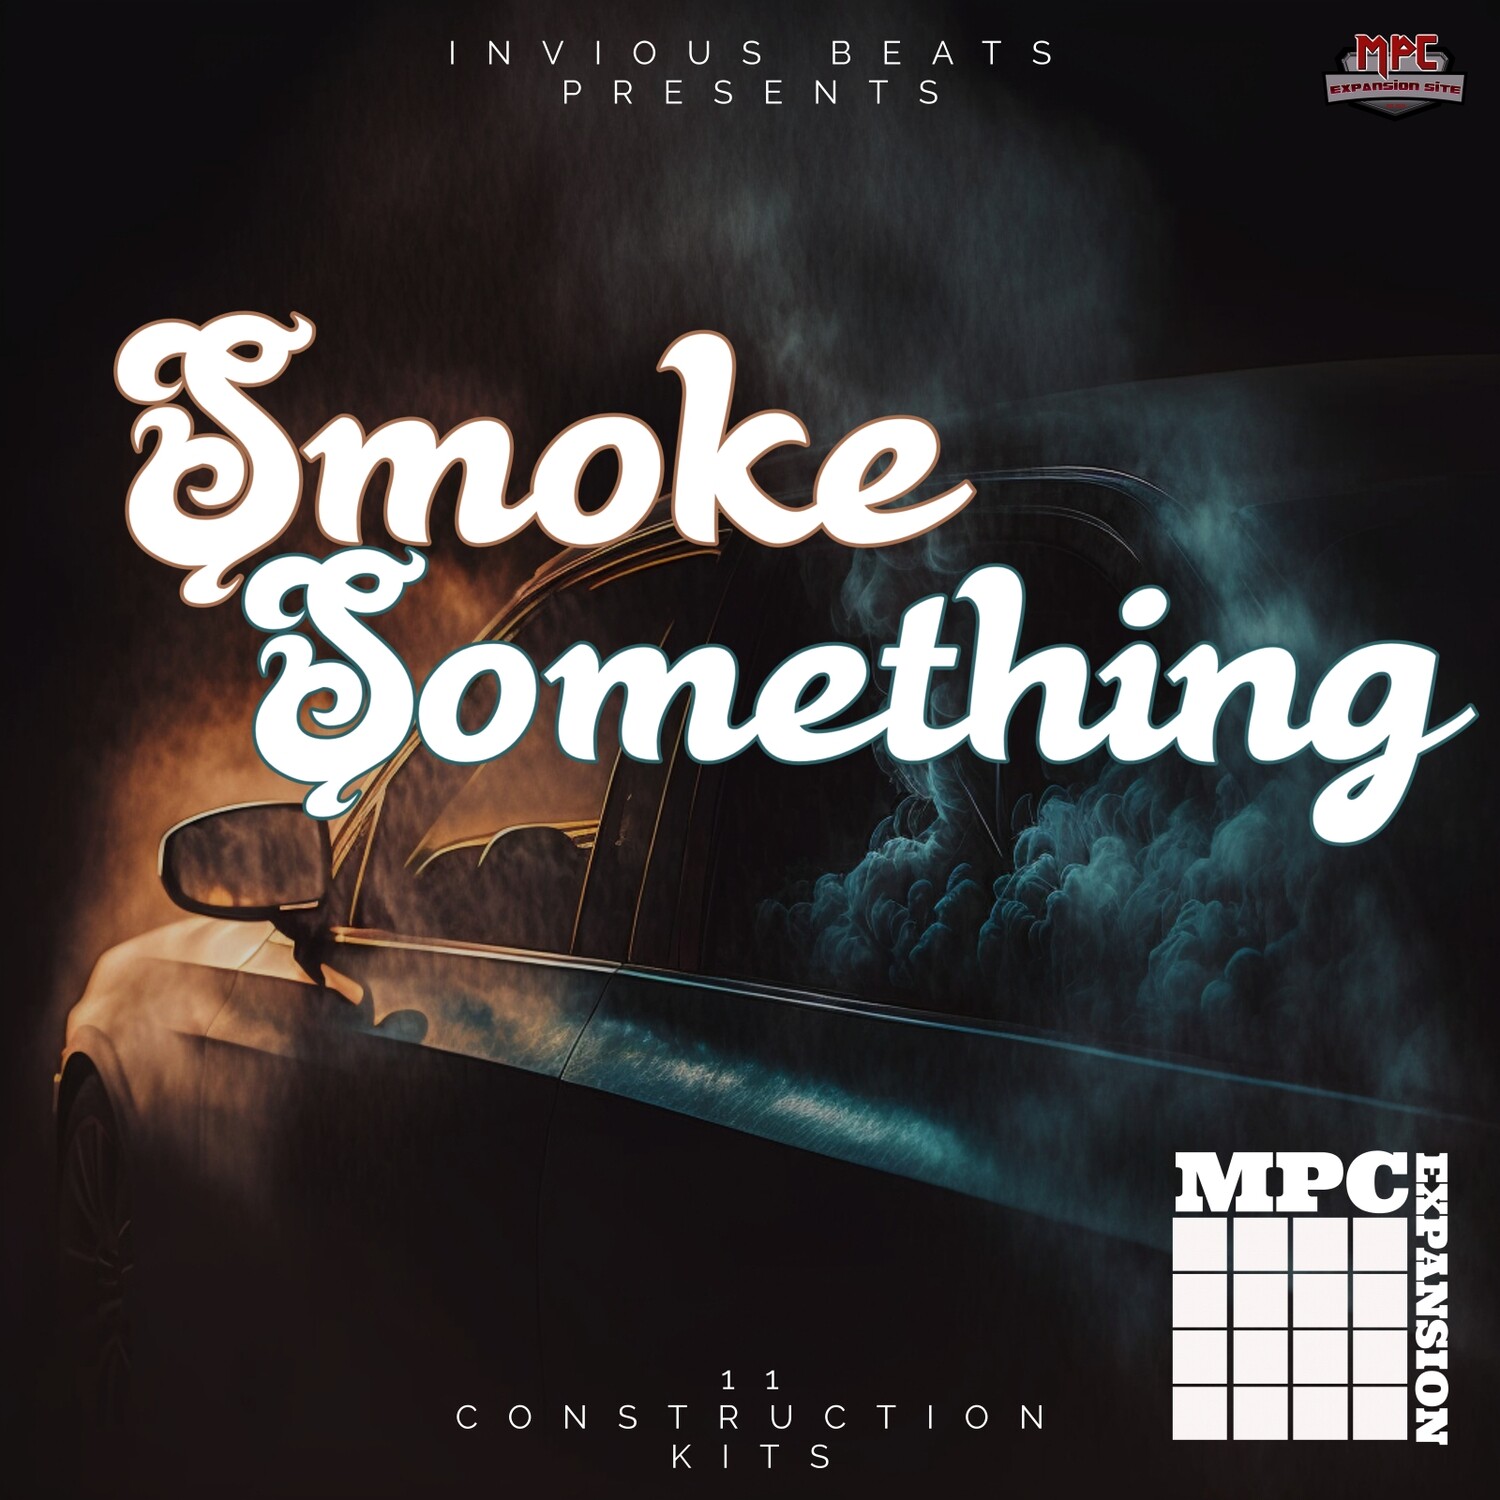 MPC EXPANSION 'SMOKE SOMETHING' by INVIOUS